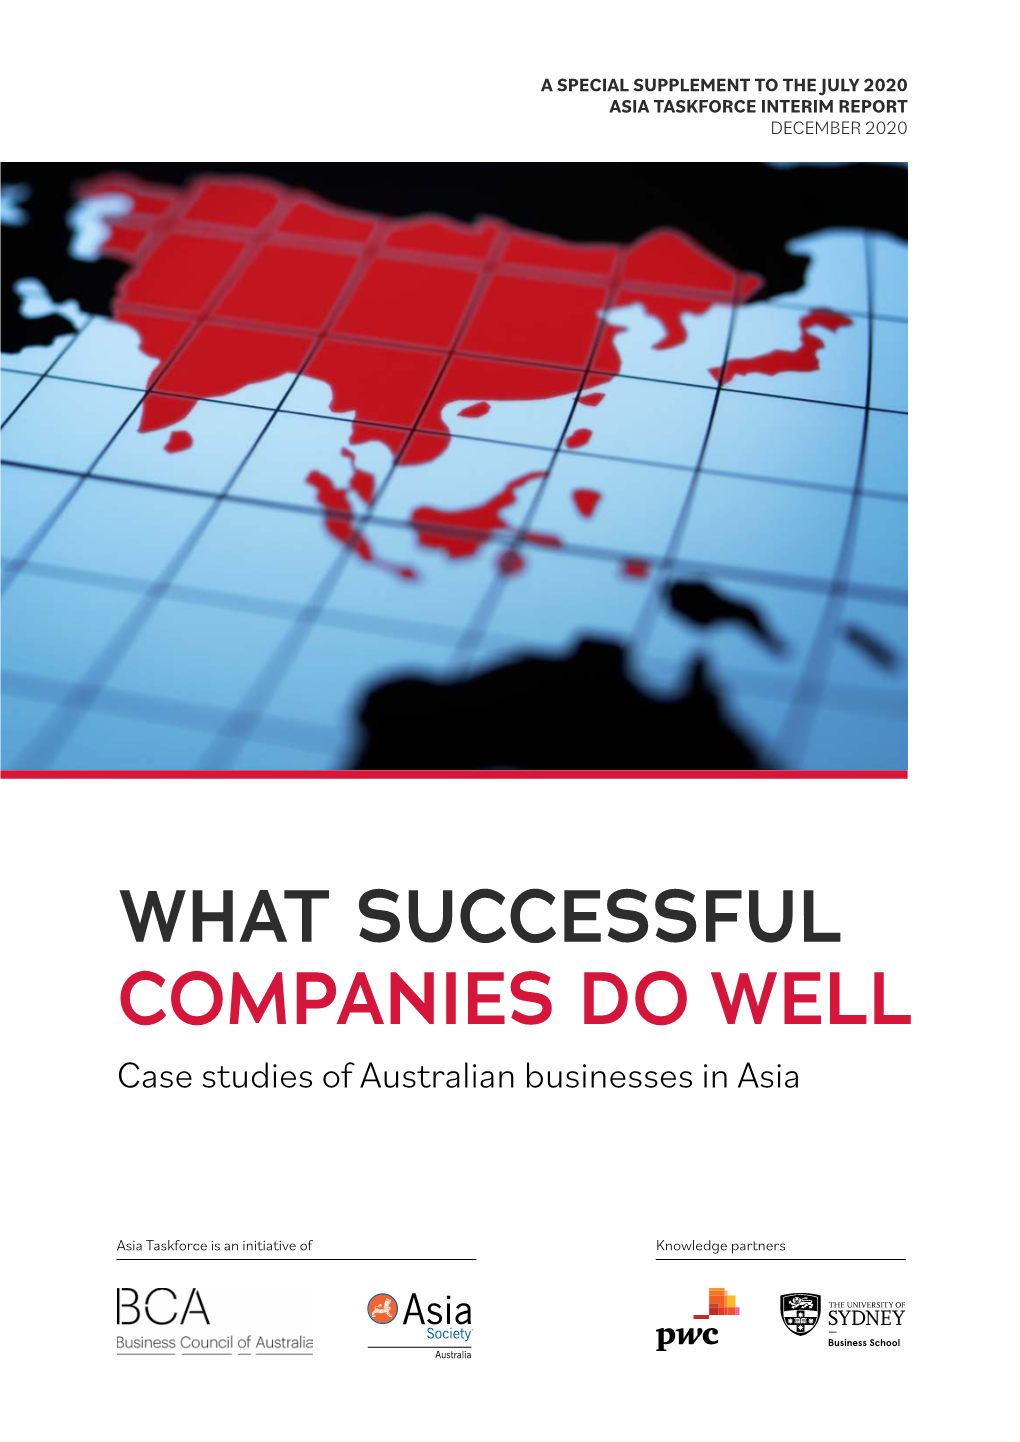 'What Successful Companies Do Well: Case Studies of Australian